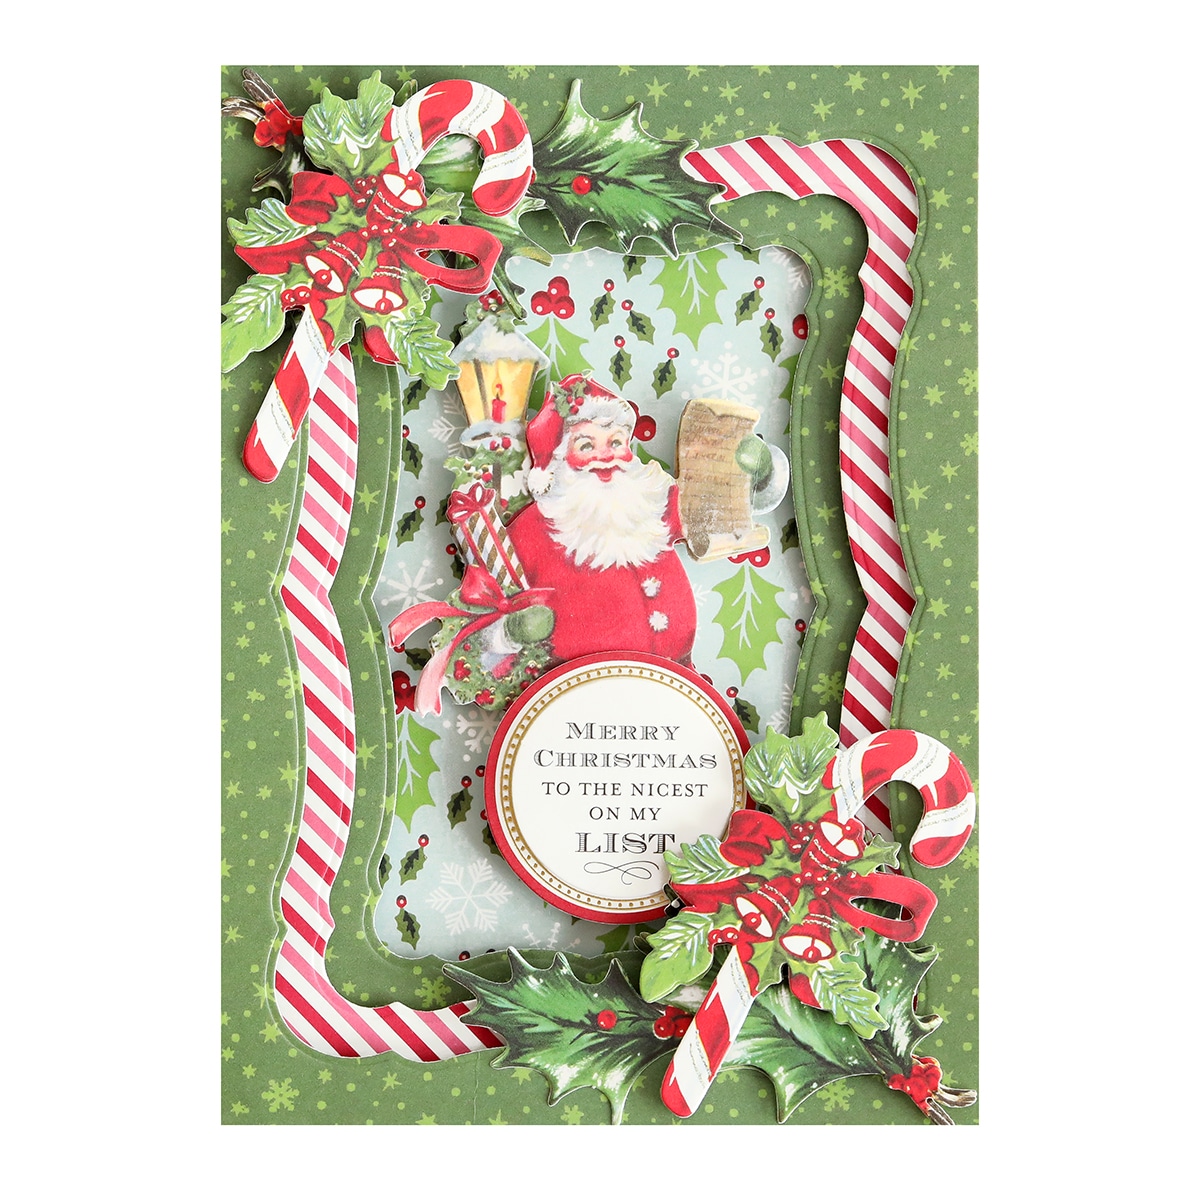 A christmas card with santa claus and candy canes.